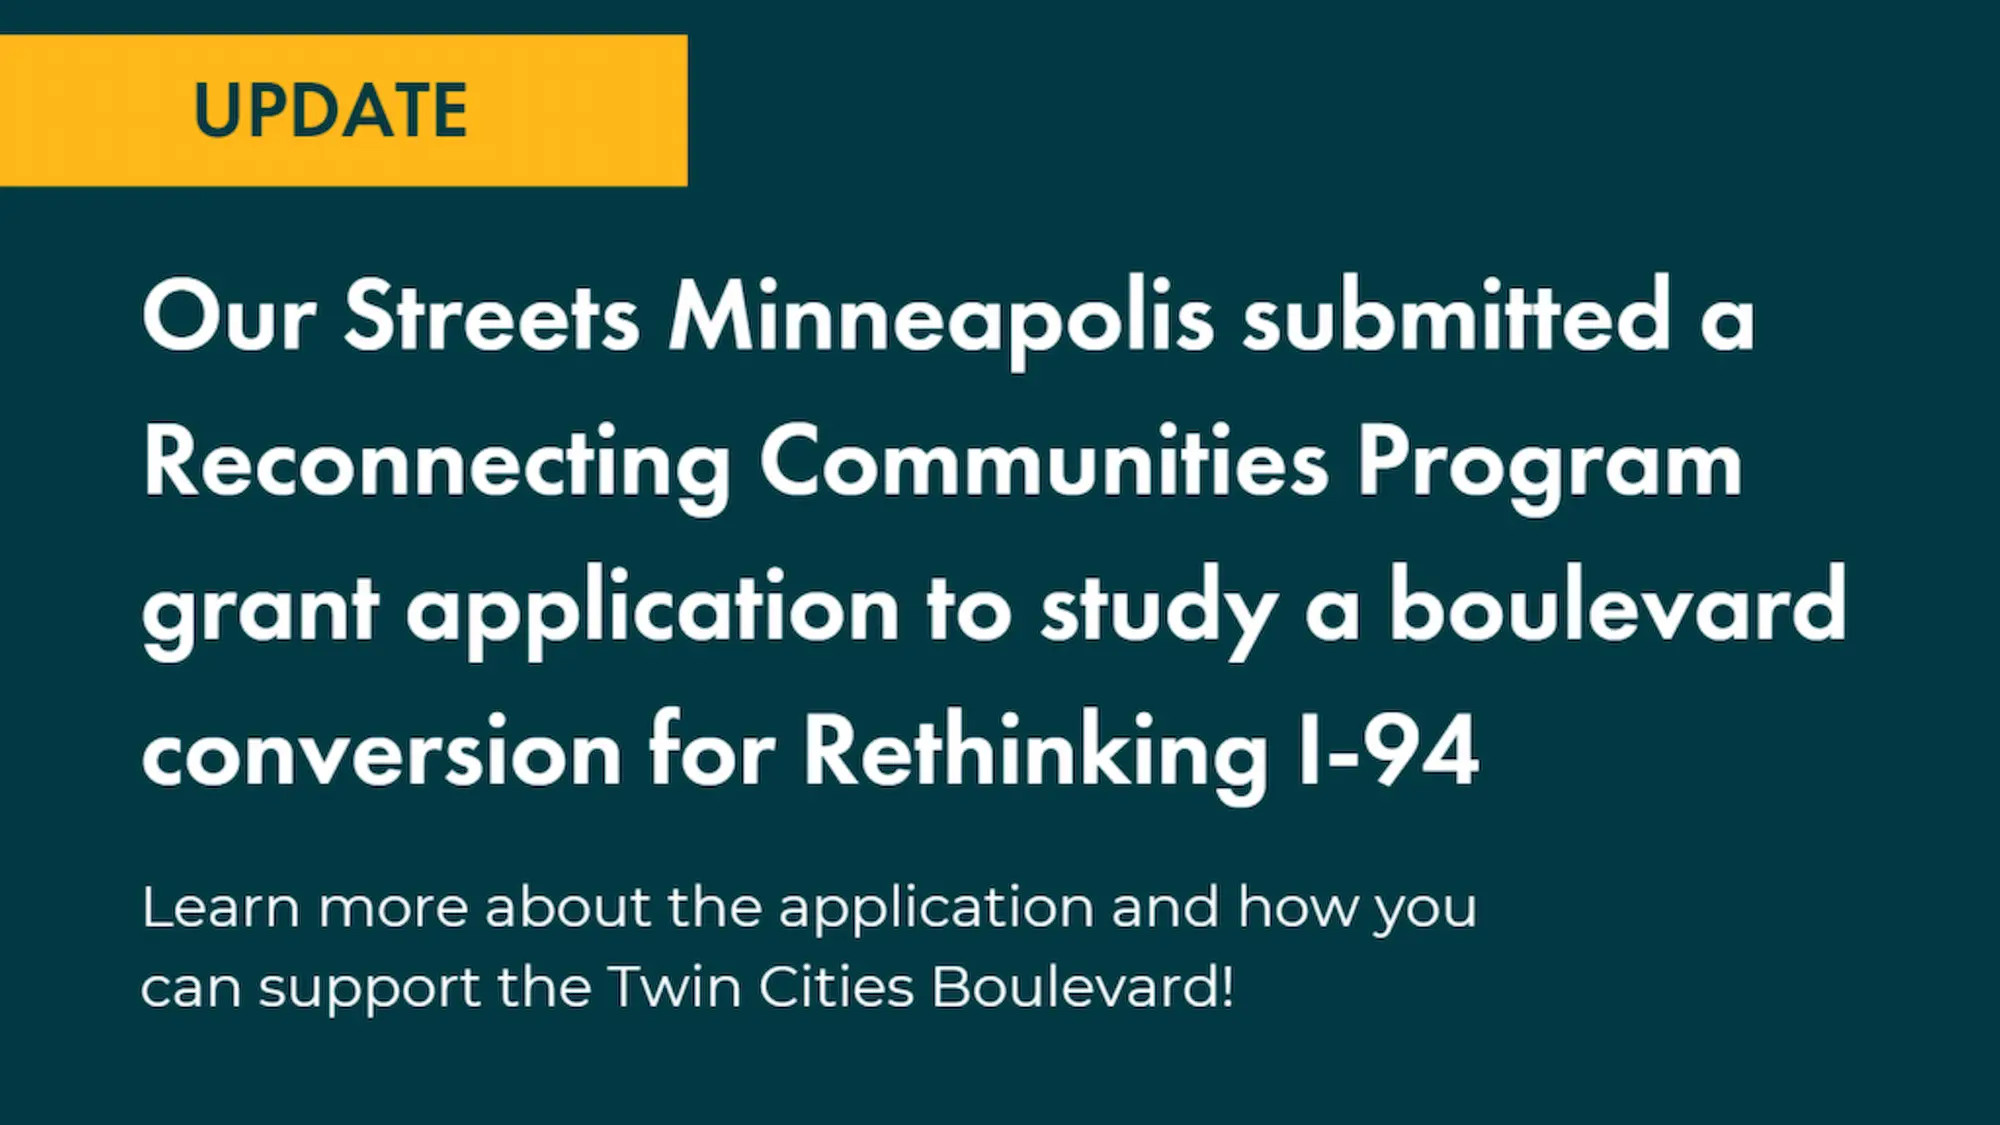 image with text that says "Our Streets Minneapolis submitted a Reconnecting Communities Program grant application to study a boulevard conversion Rethinking I-94"